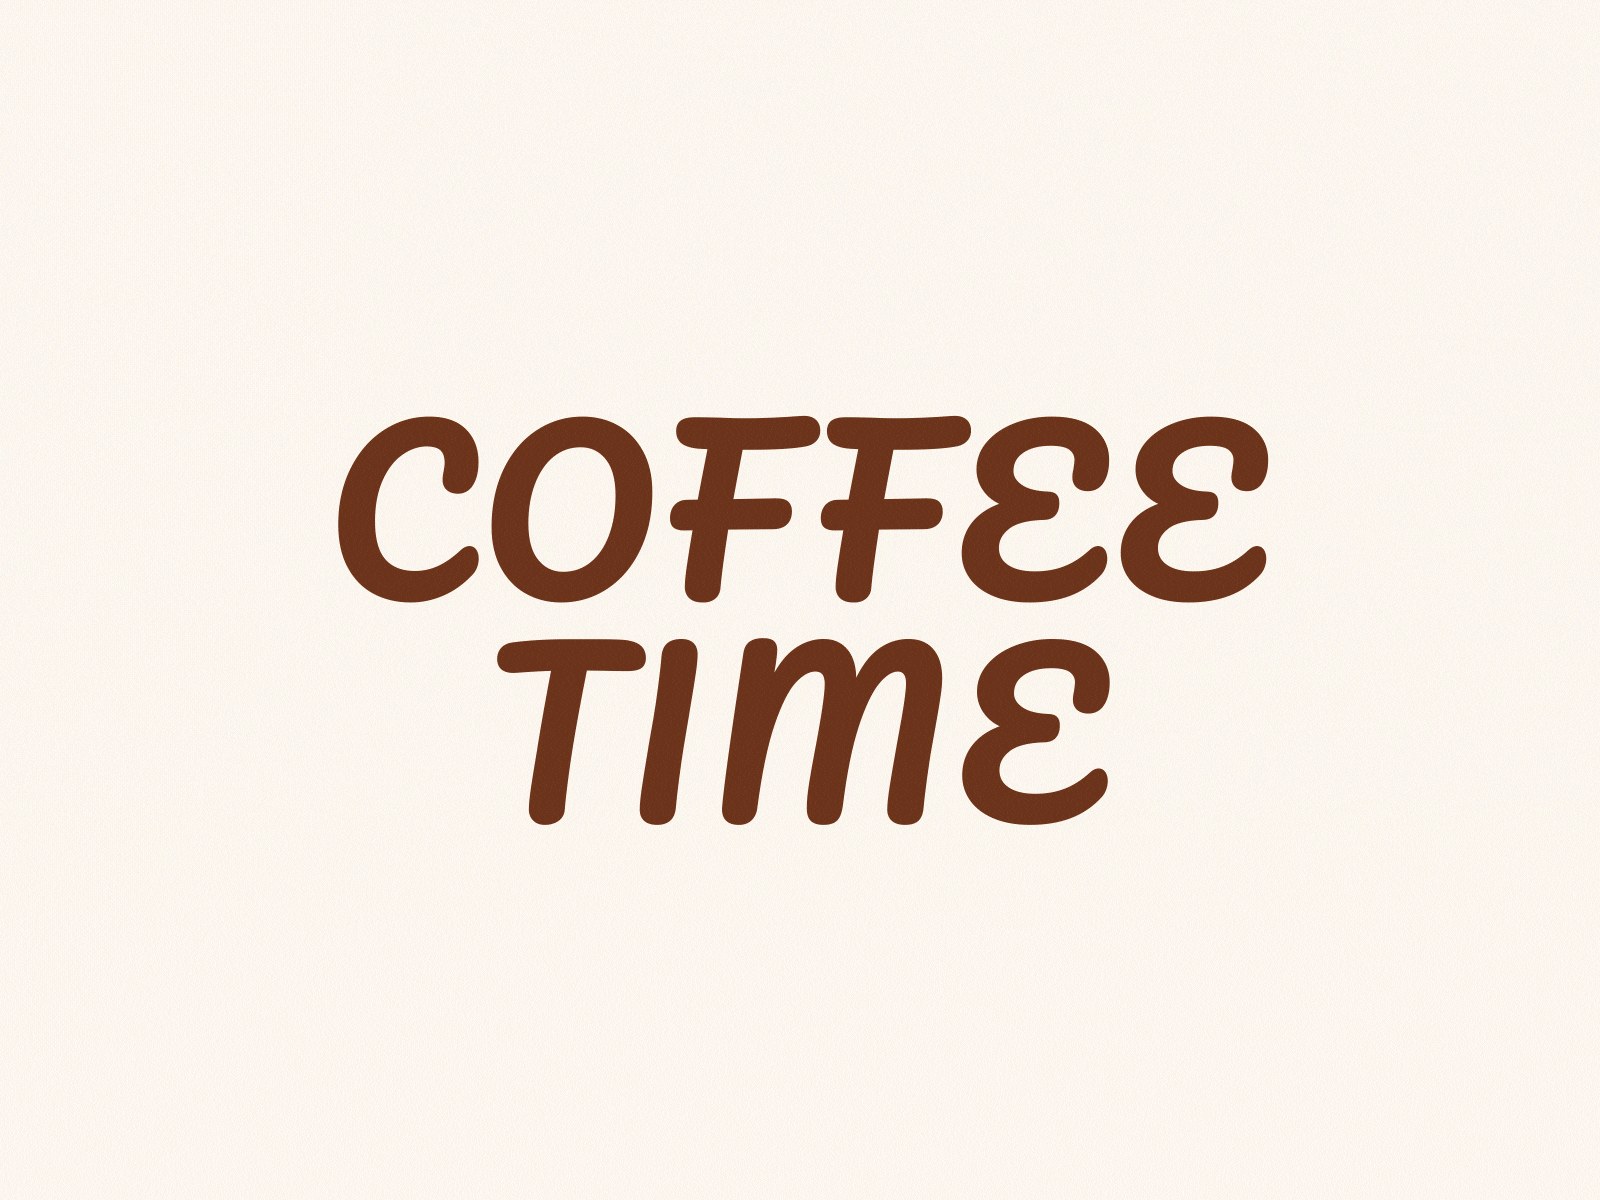 It's coffee time adobe after effects aftereffects animated animatedgif animation branding celebration cheers coffee coffee cup coffee shop coffee time colorful cups design hands illustration